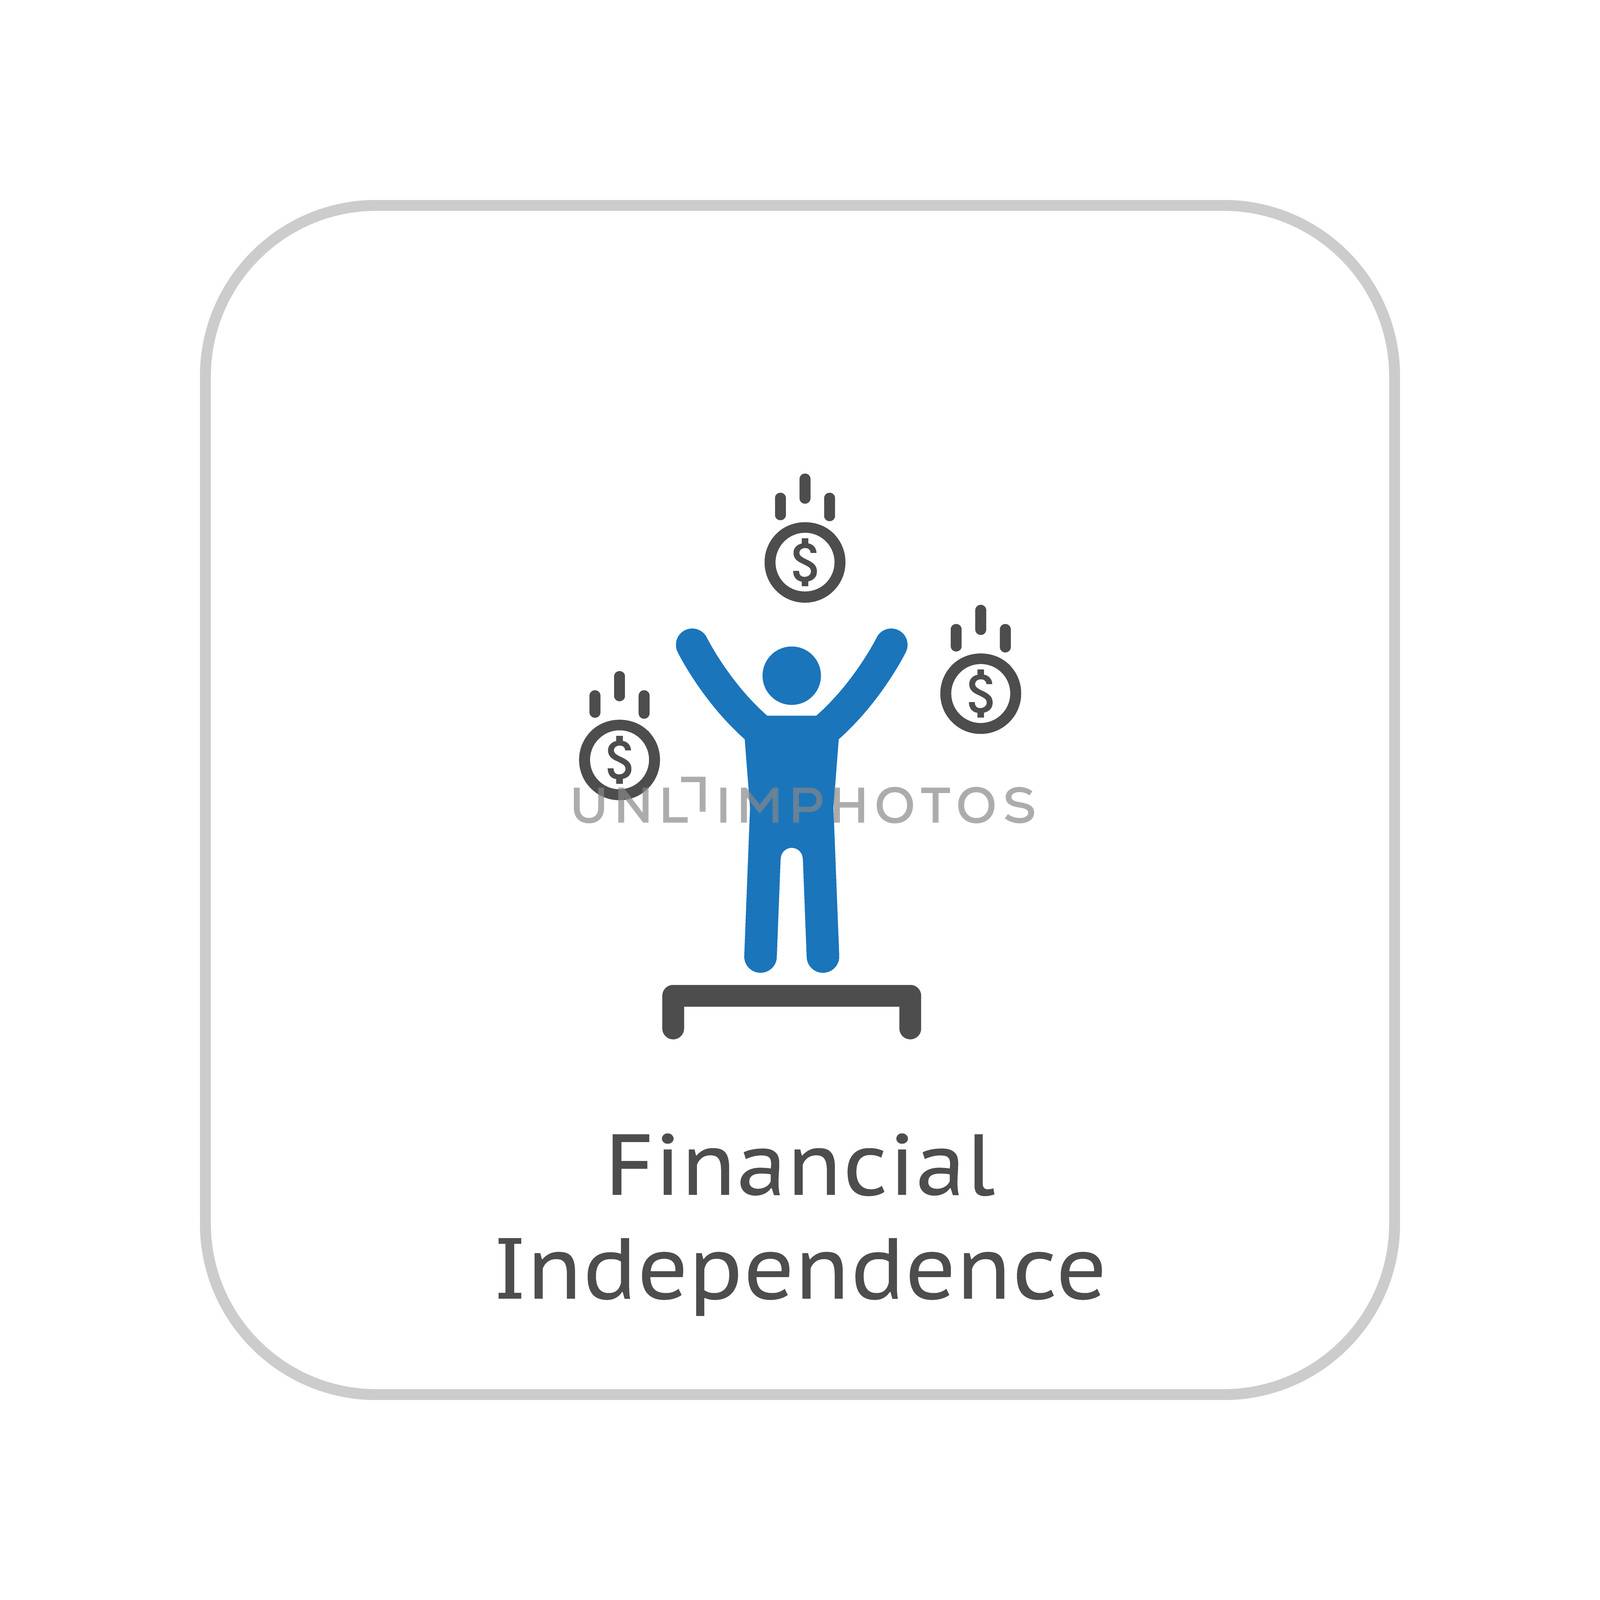 Financial Independence Icon. Business Concept. Flat Design. Isolated Illustration.